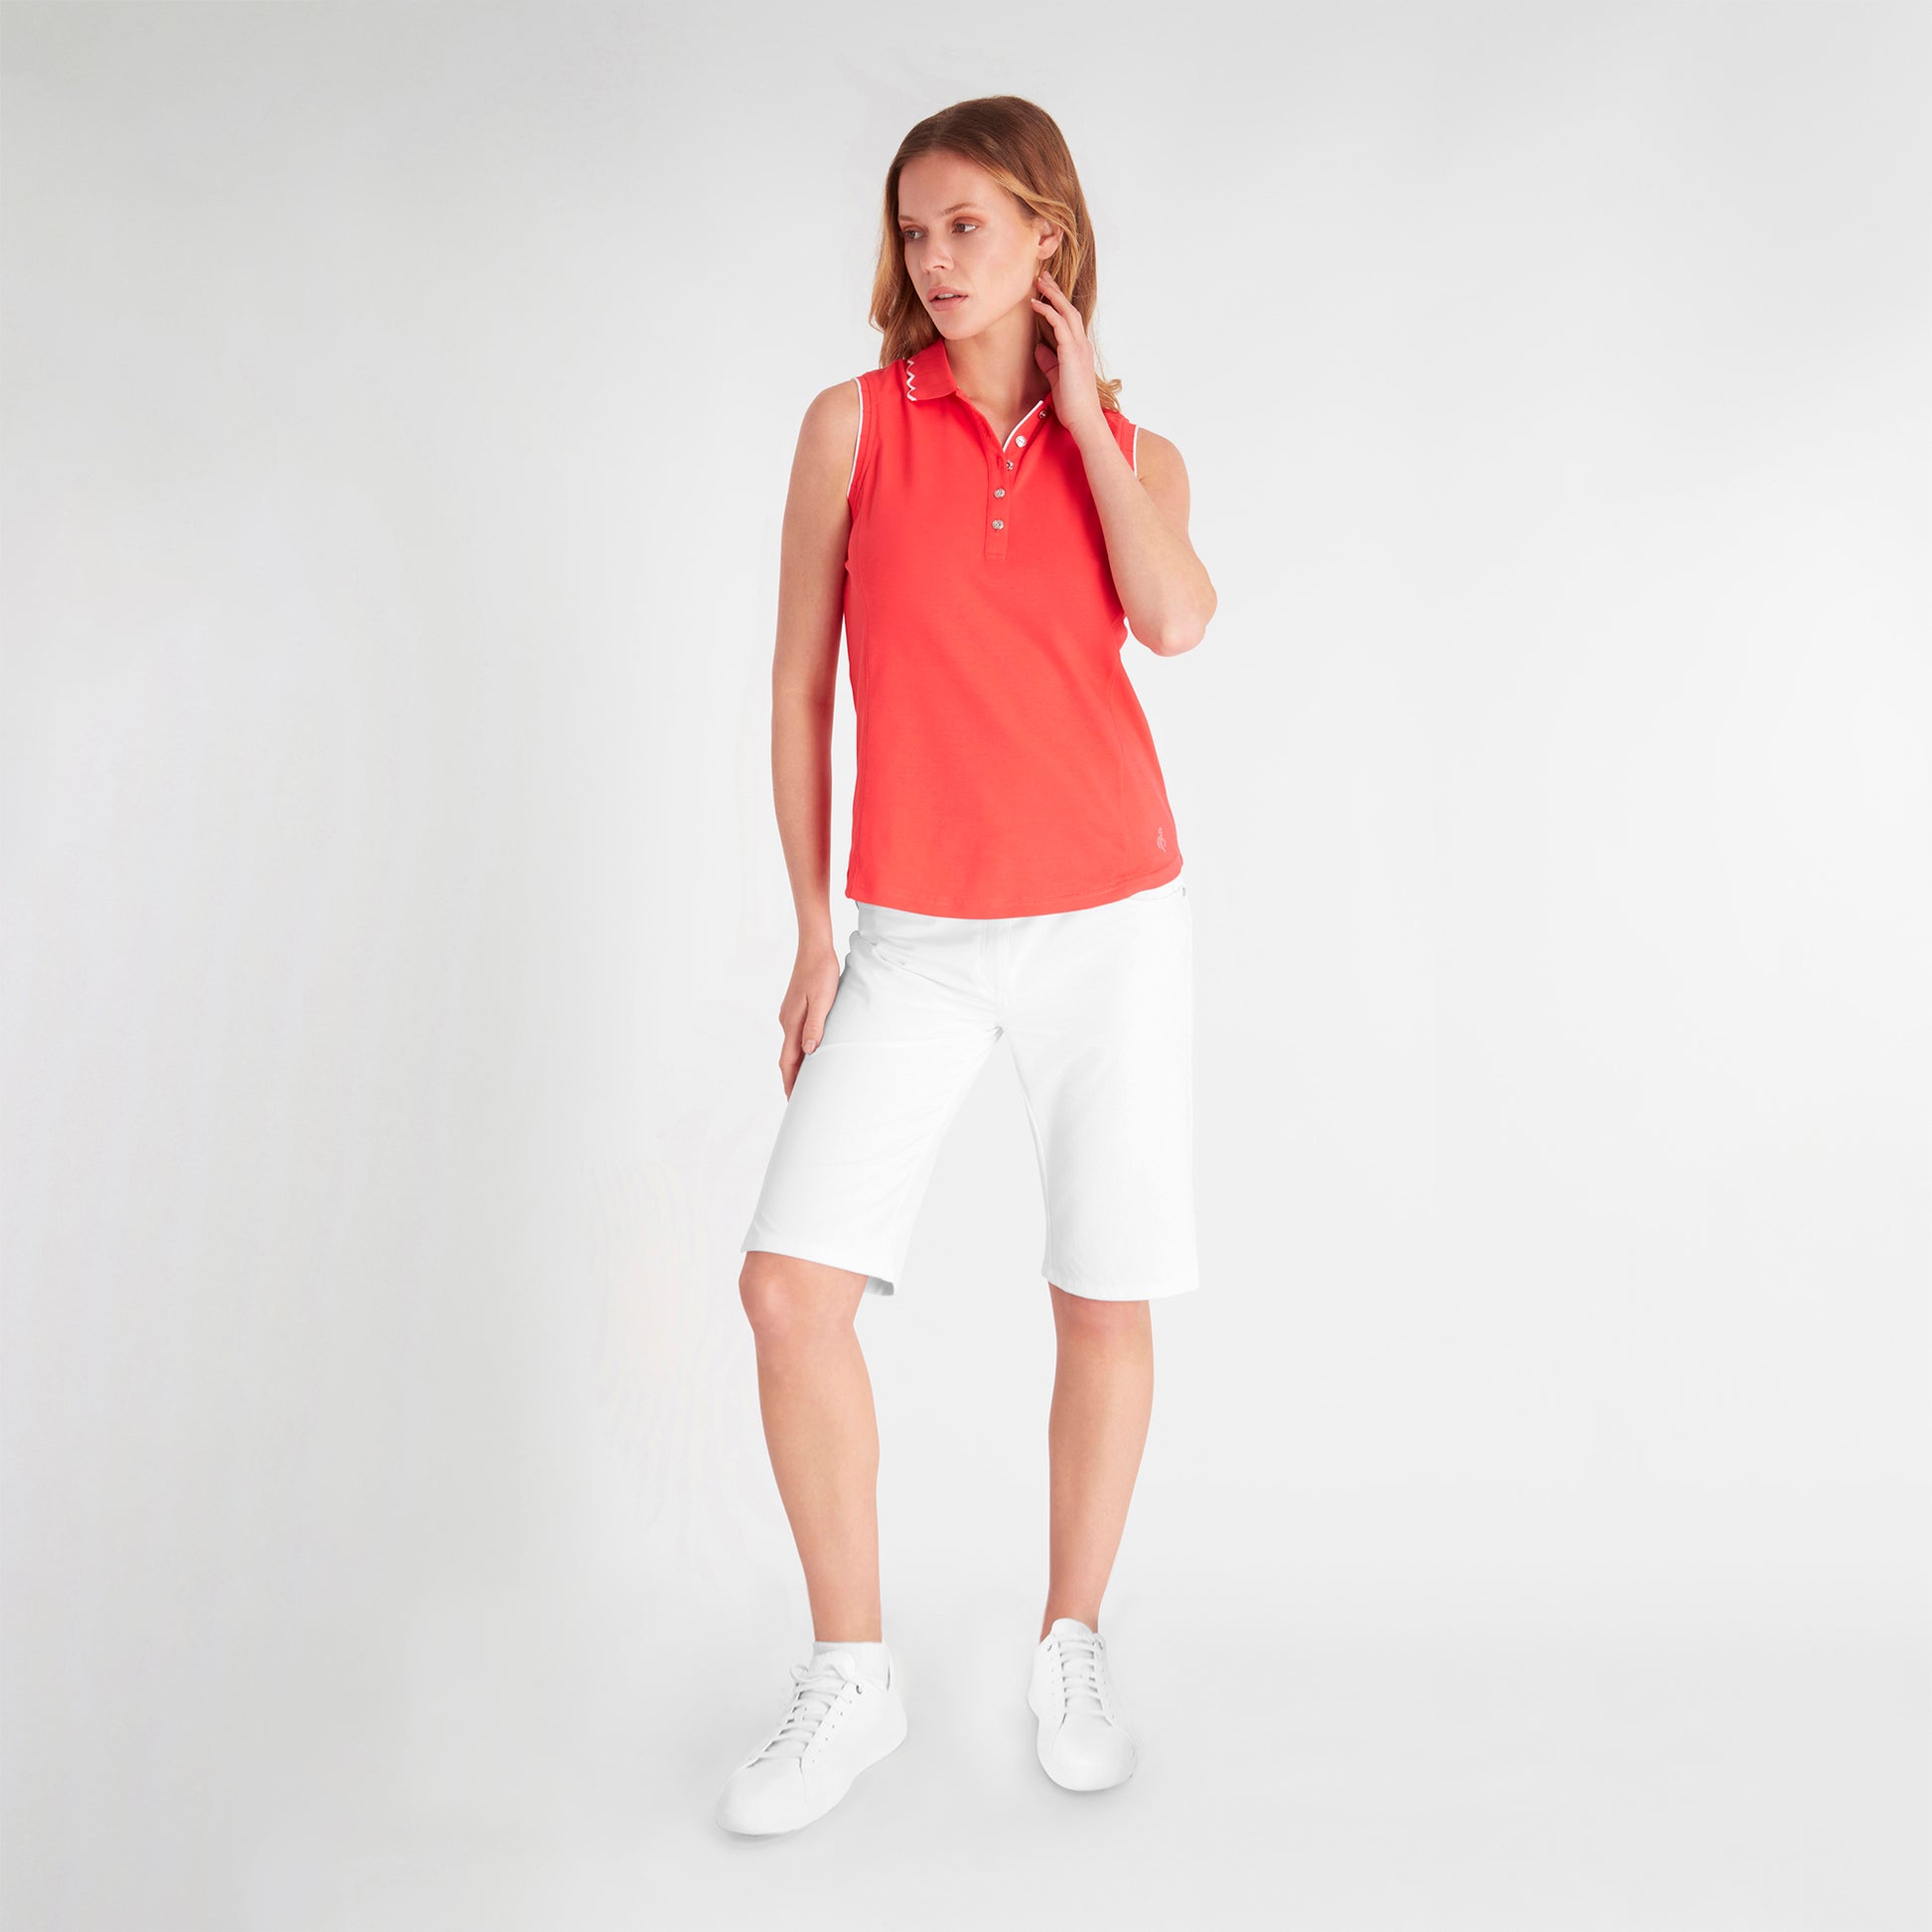 Green Lamb Ladies Sleeveless Polo with Scalloped Collar in Poppy